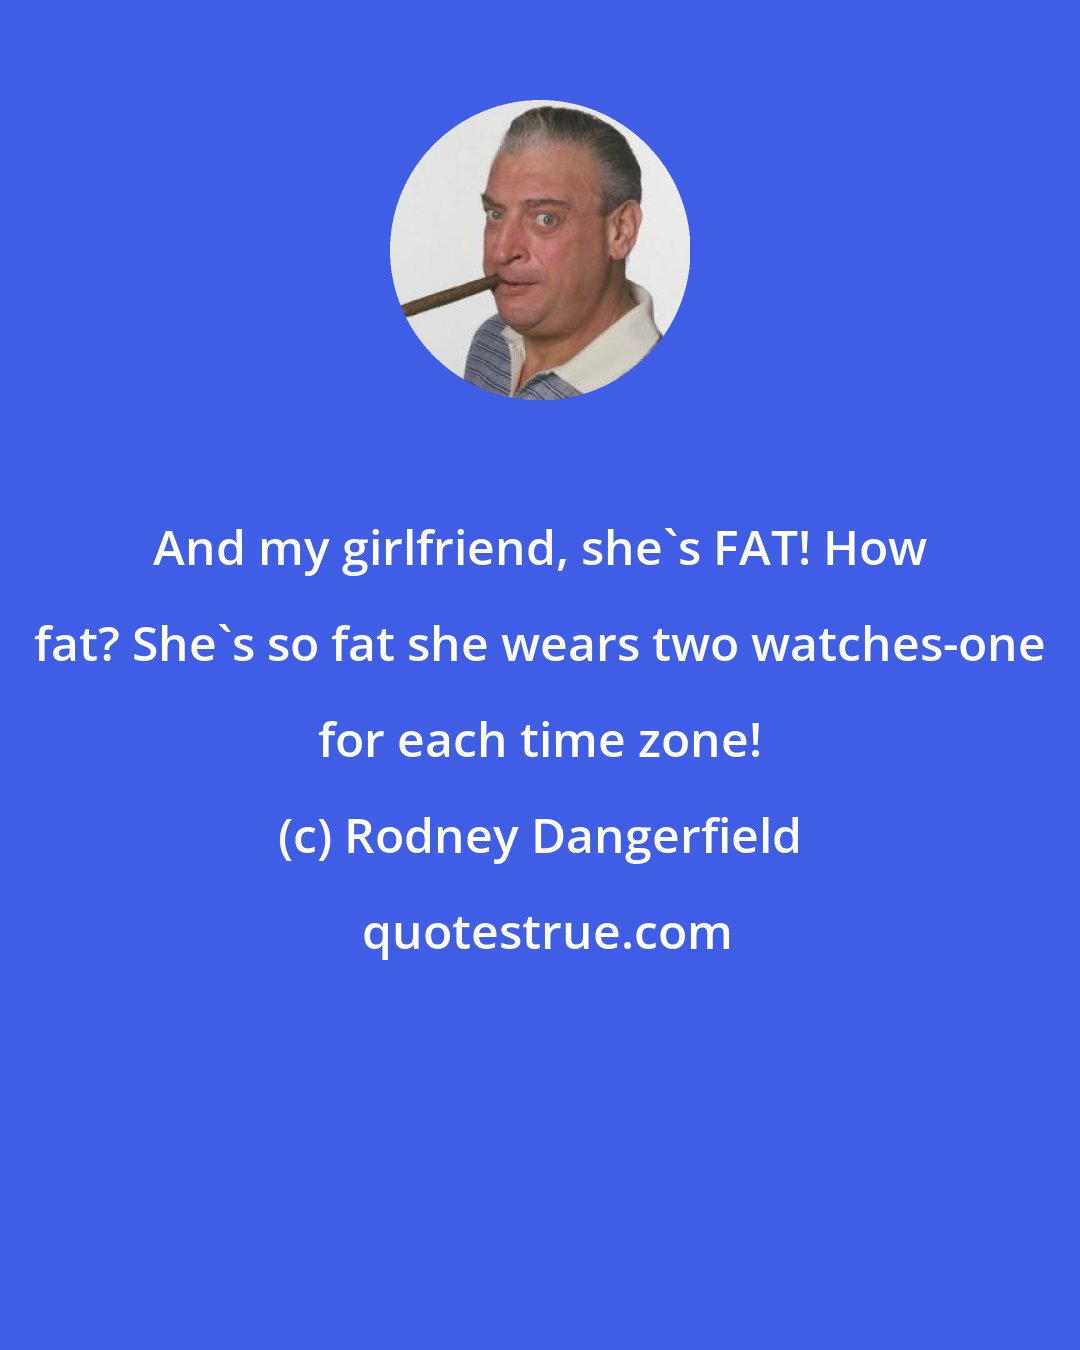 Rodney Dangerfield: And my girlfriend, she's FAT! How fat? She's so fat she wears two watches-one for each time zone!